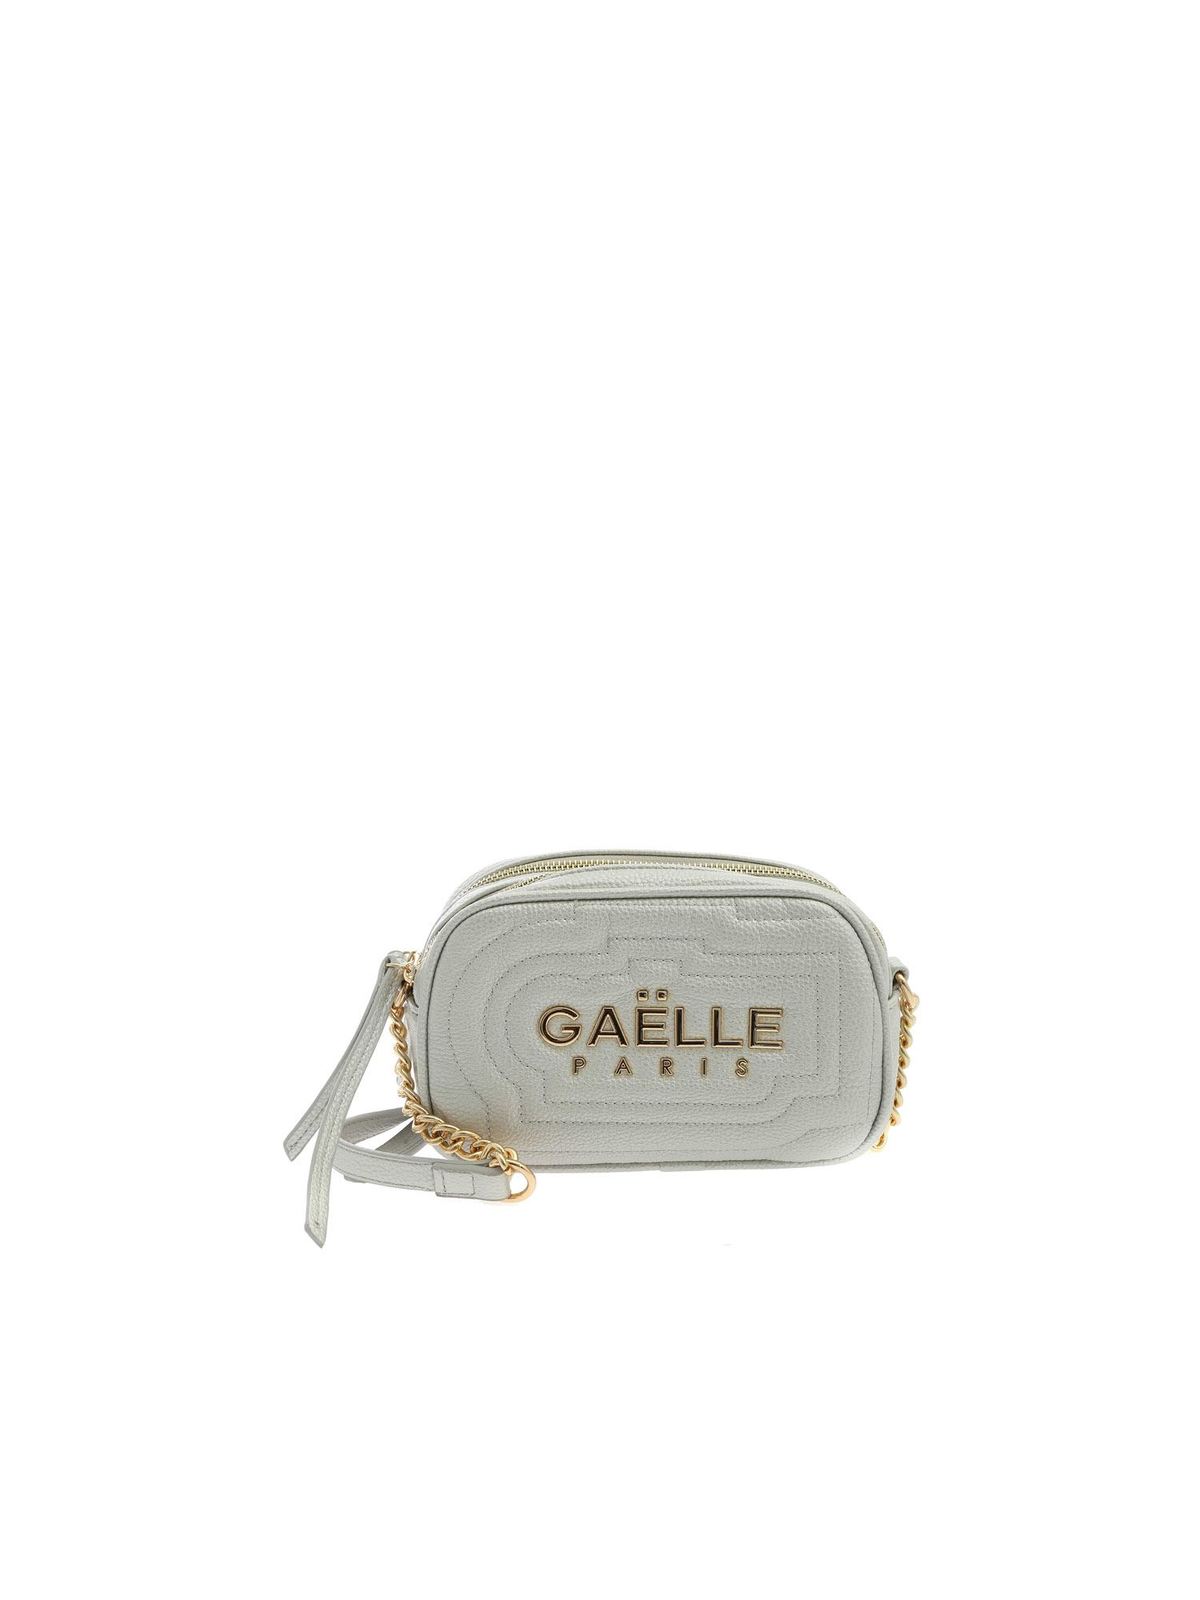 GAELLE PARIS SYNTHETIC LEATHER CAMERA BAG IN SILVER